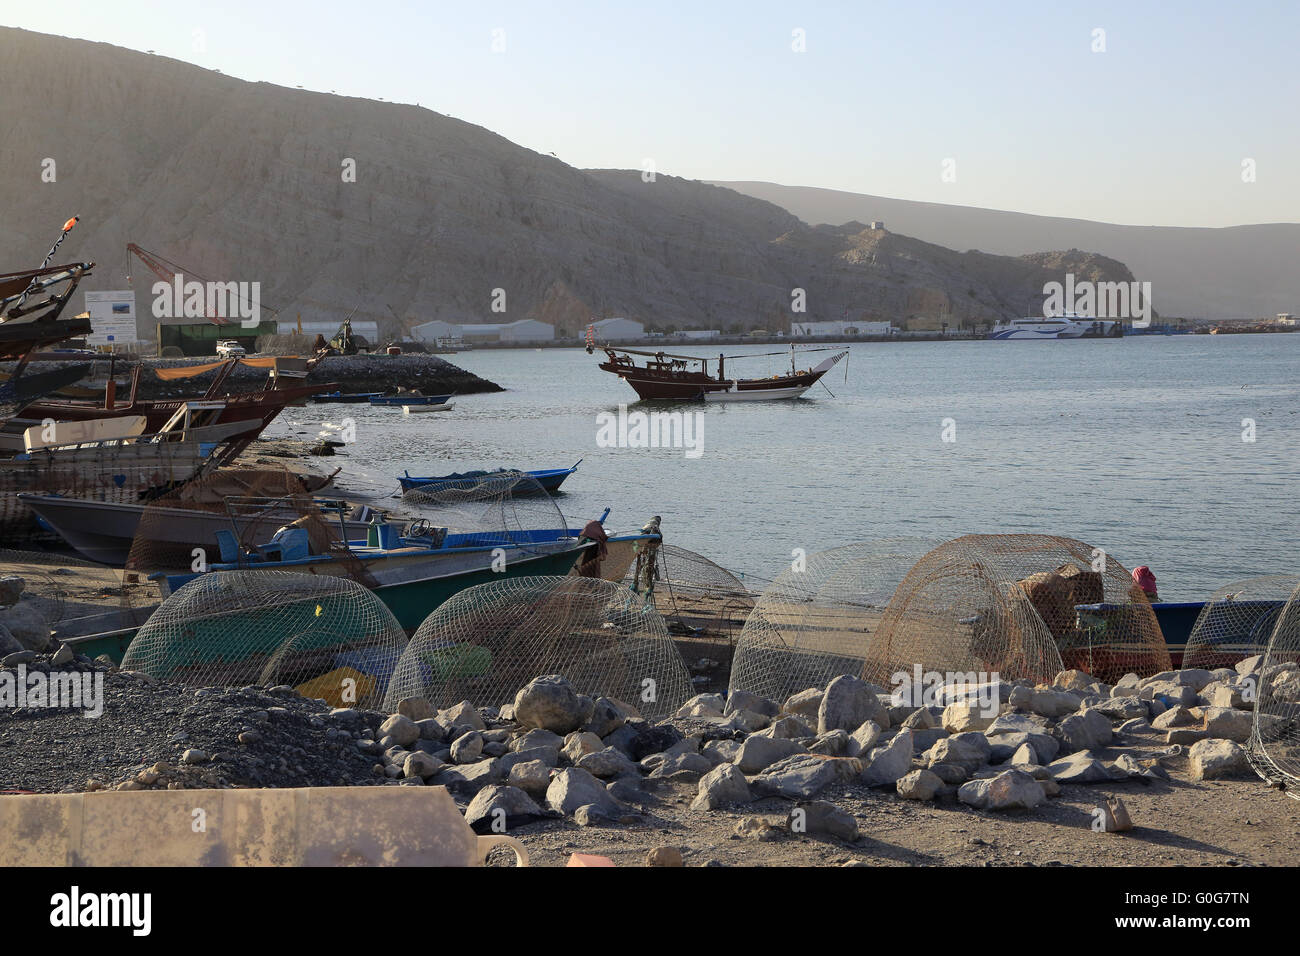 Oman, Kashab, Dhows a boats in the port Stock Photo